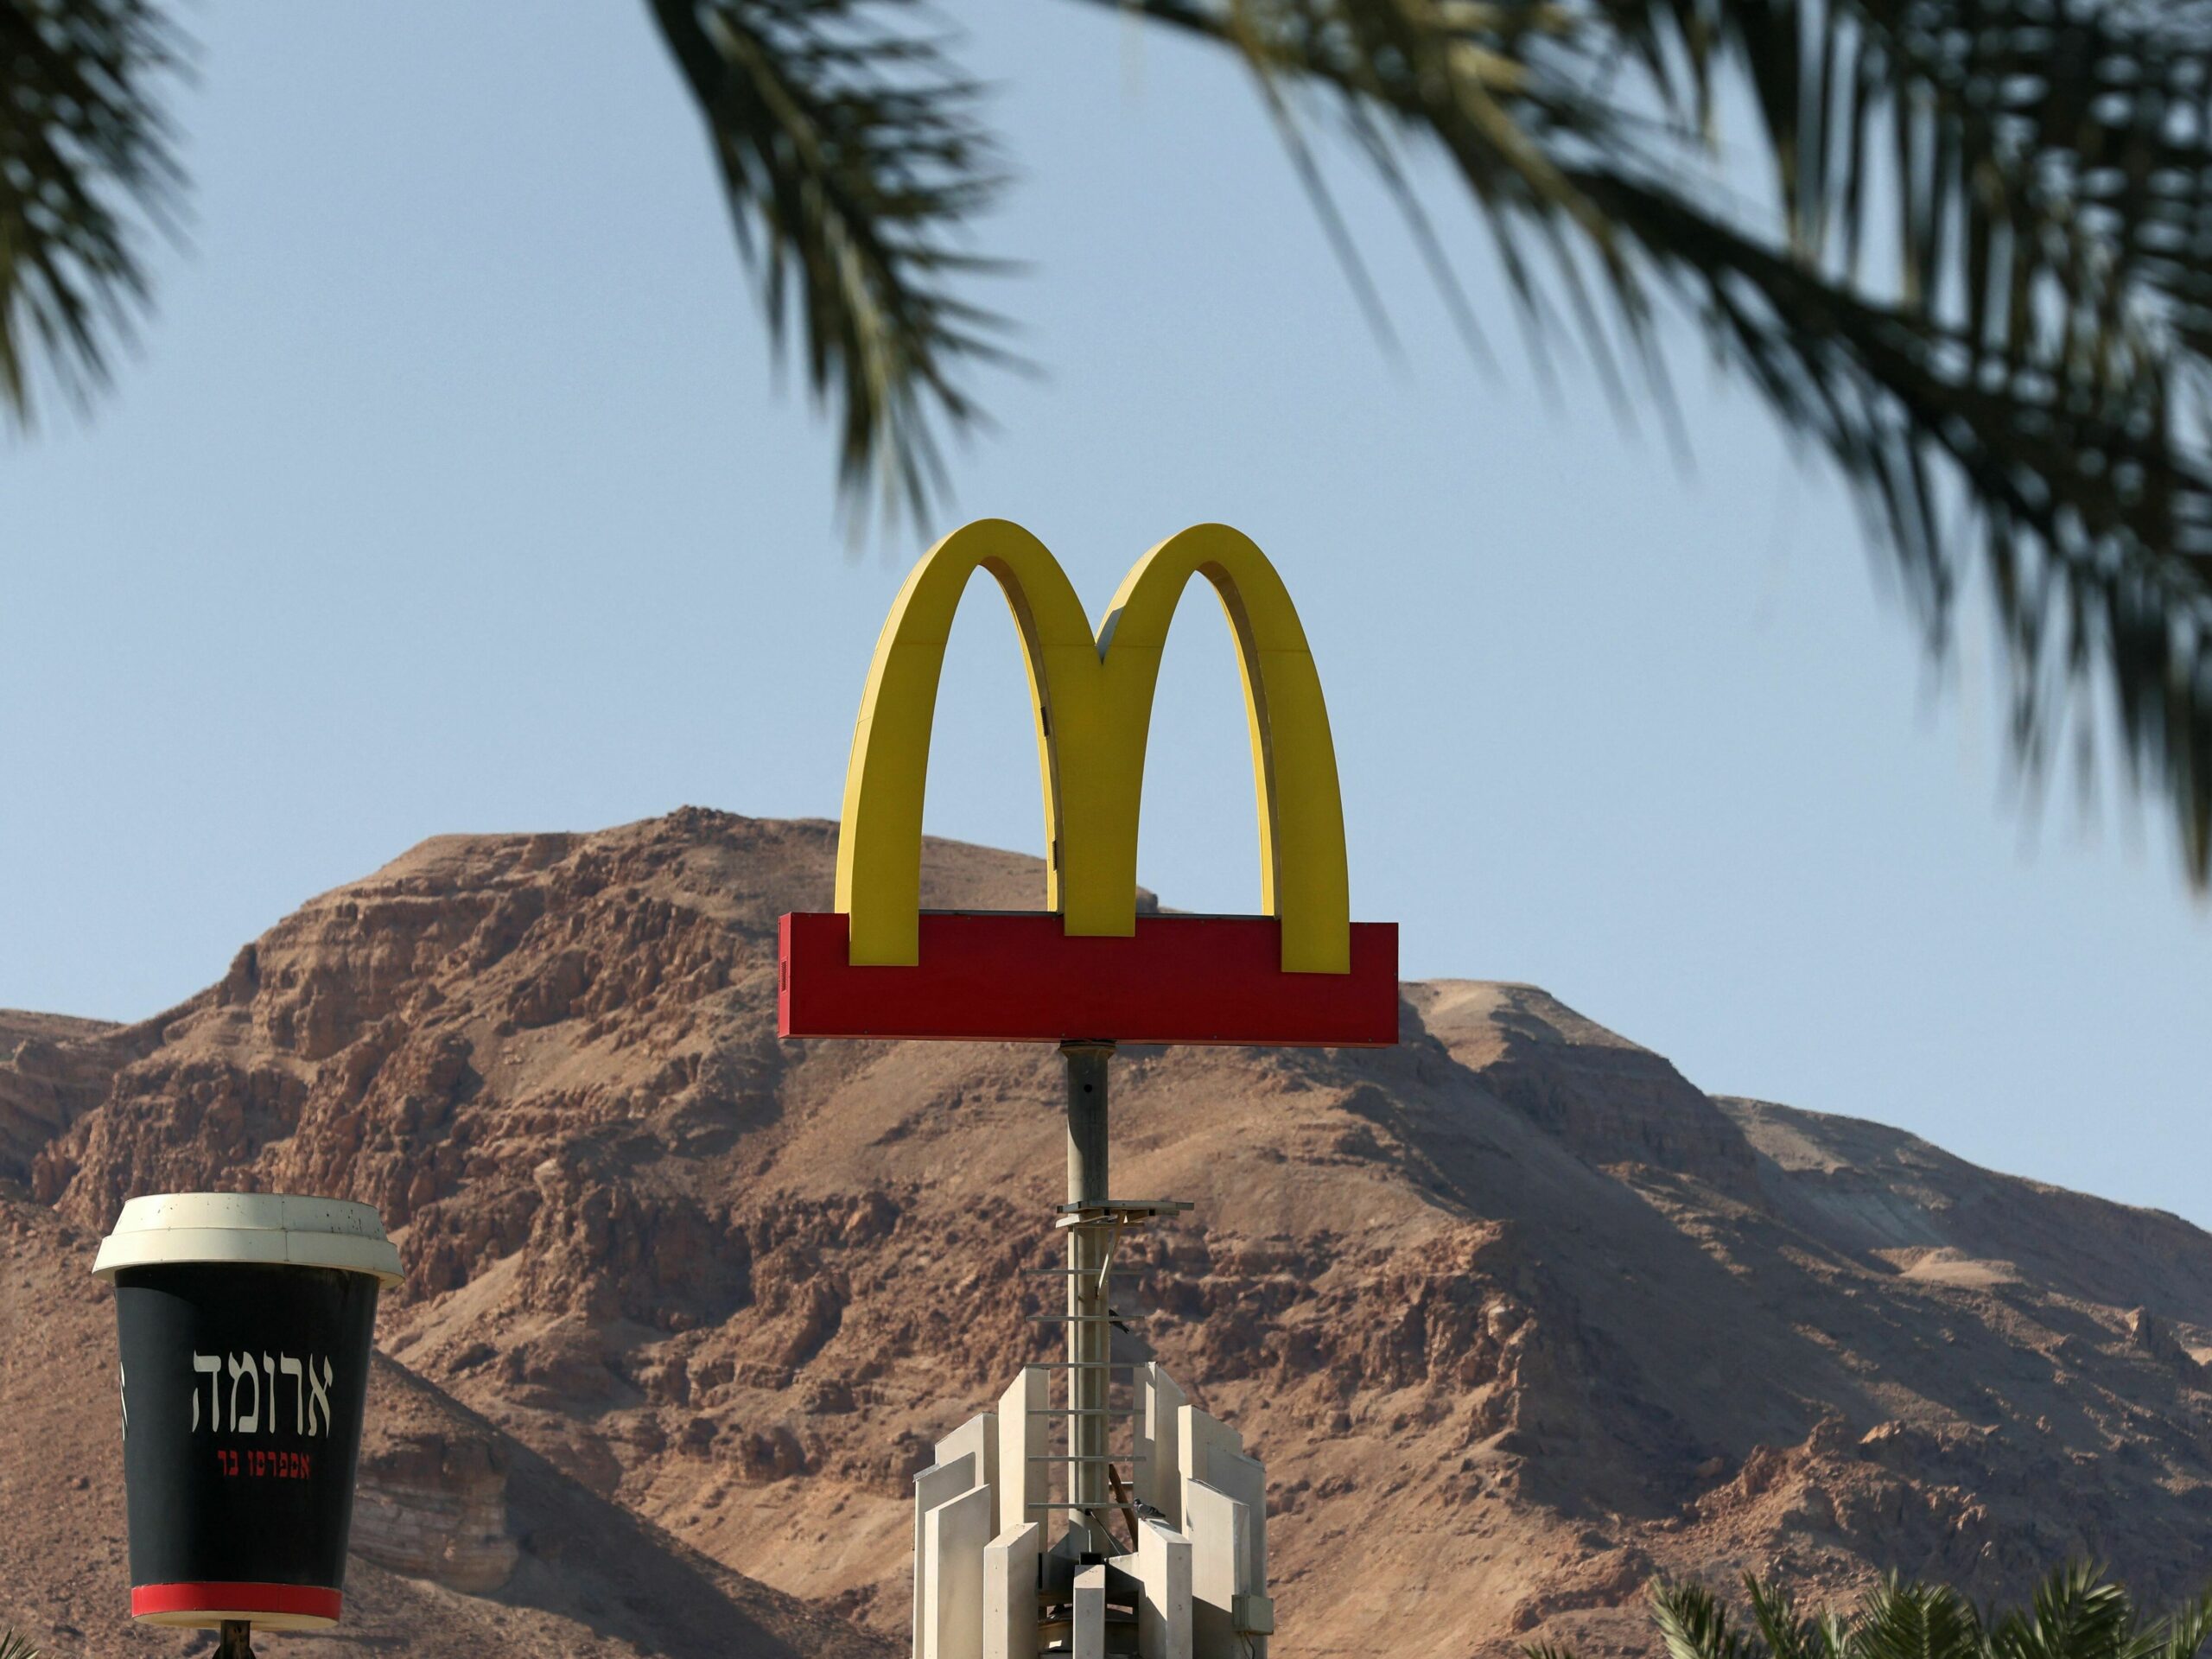 A McDonald's restaurant's iconic "golden arches" logo next to a giant coffee cup of its "Aroma" trademark in the Israeli Dead Sea resort town of Ein Bokek.